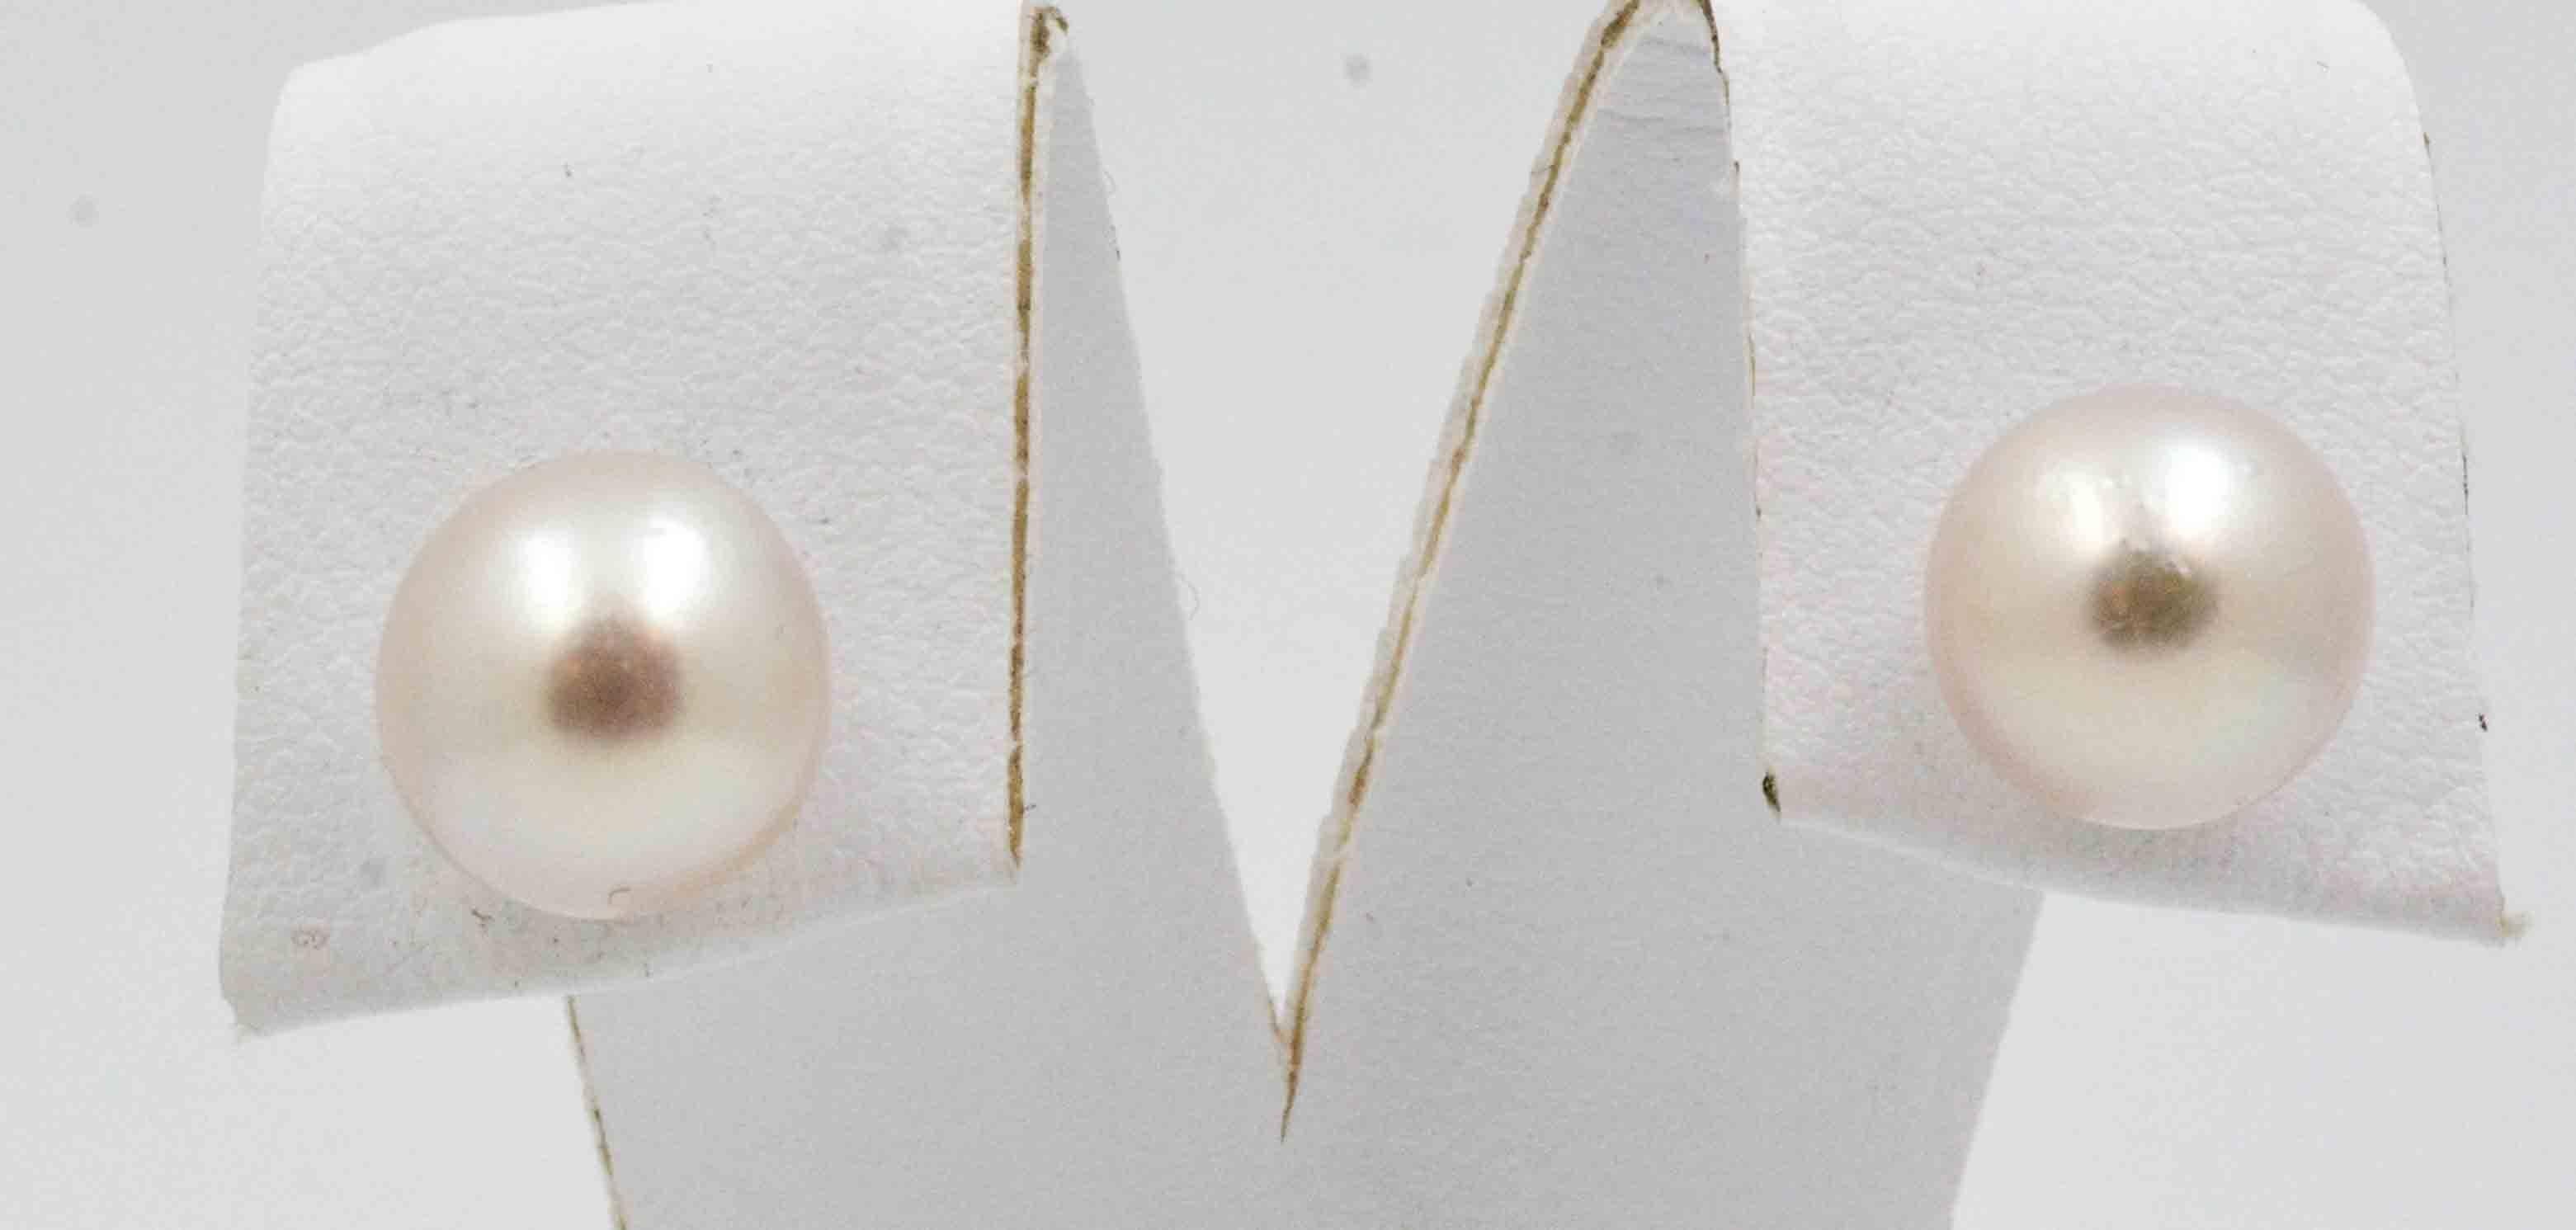 Whether dressing for day or night, these 18 kt yellow gold Cultured Pearl earrings will compliment your style. 9x9.5 mm Cultured Pearls set in 18kt Yellow gold posts. 